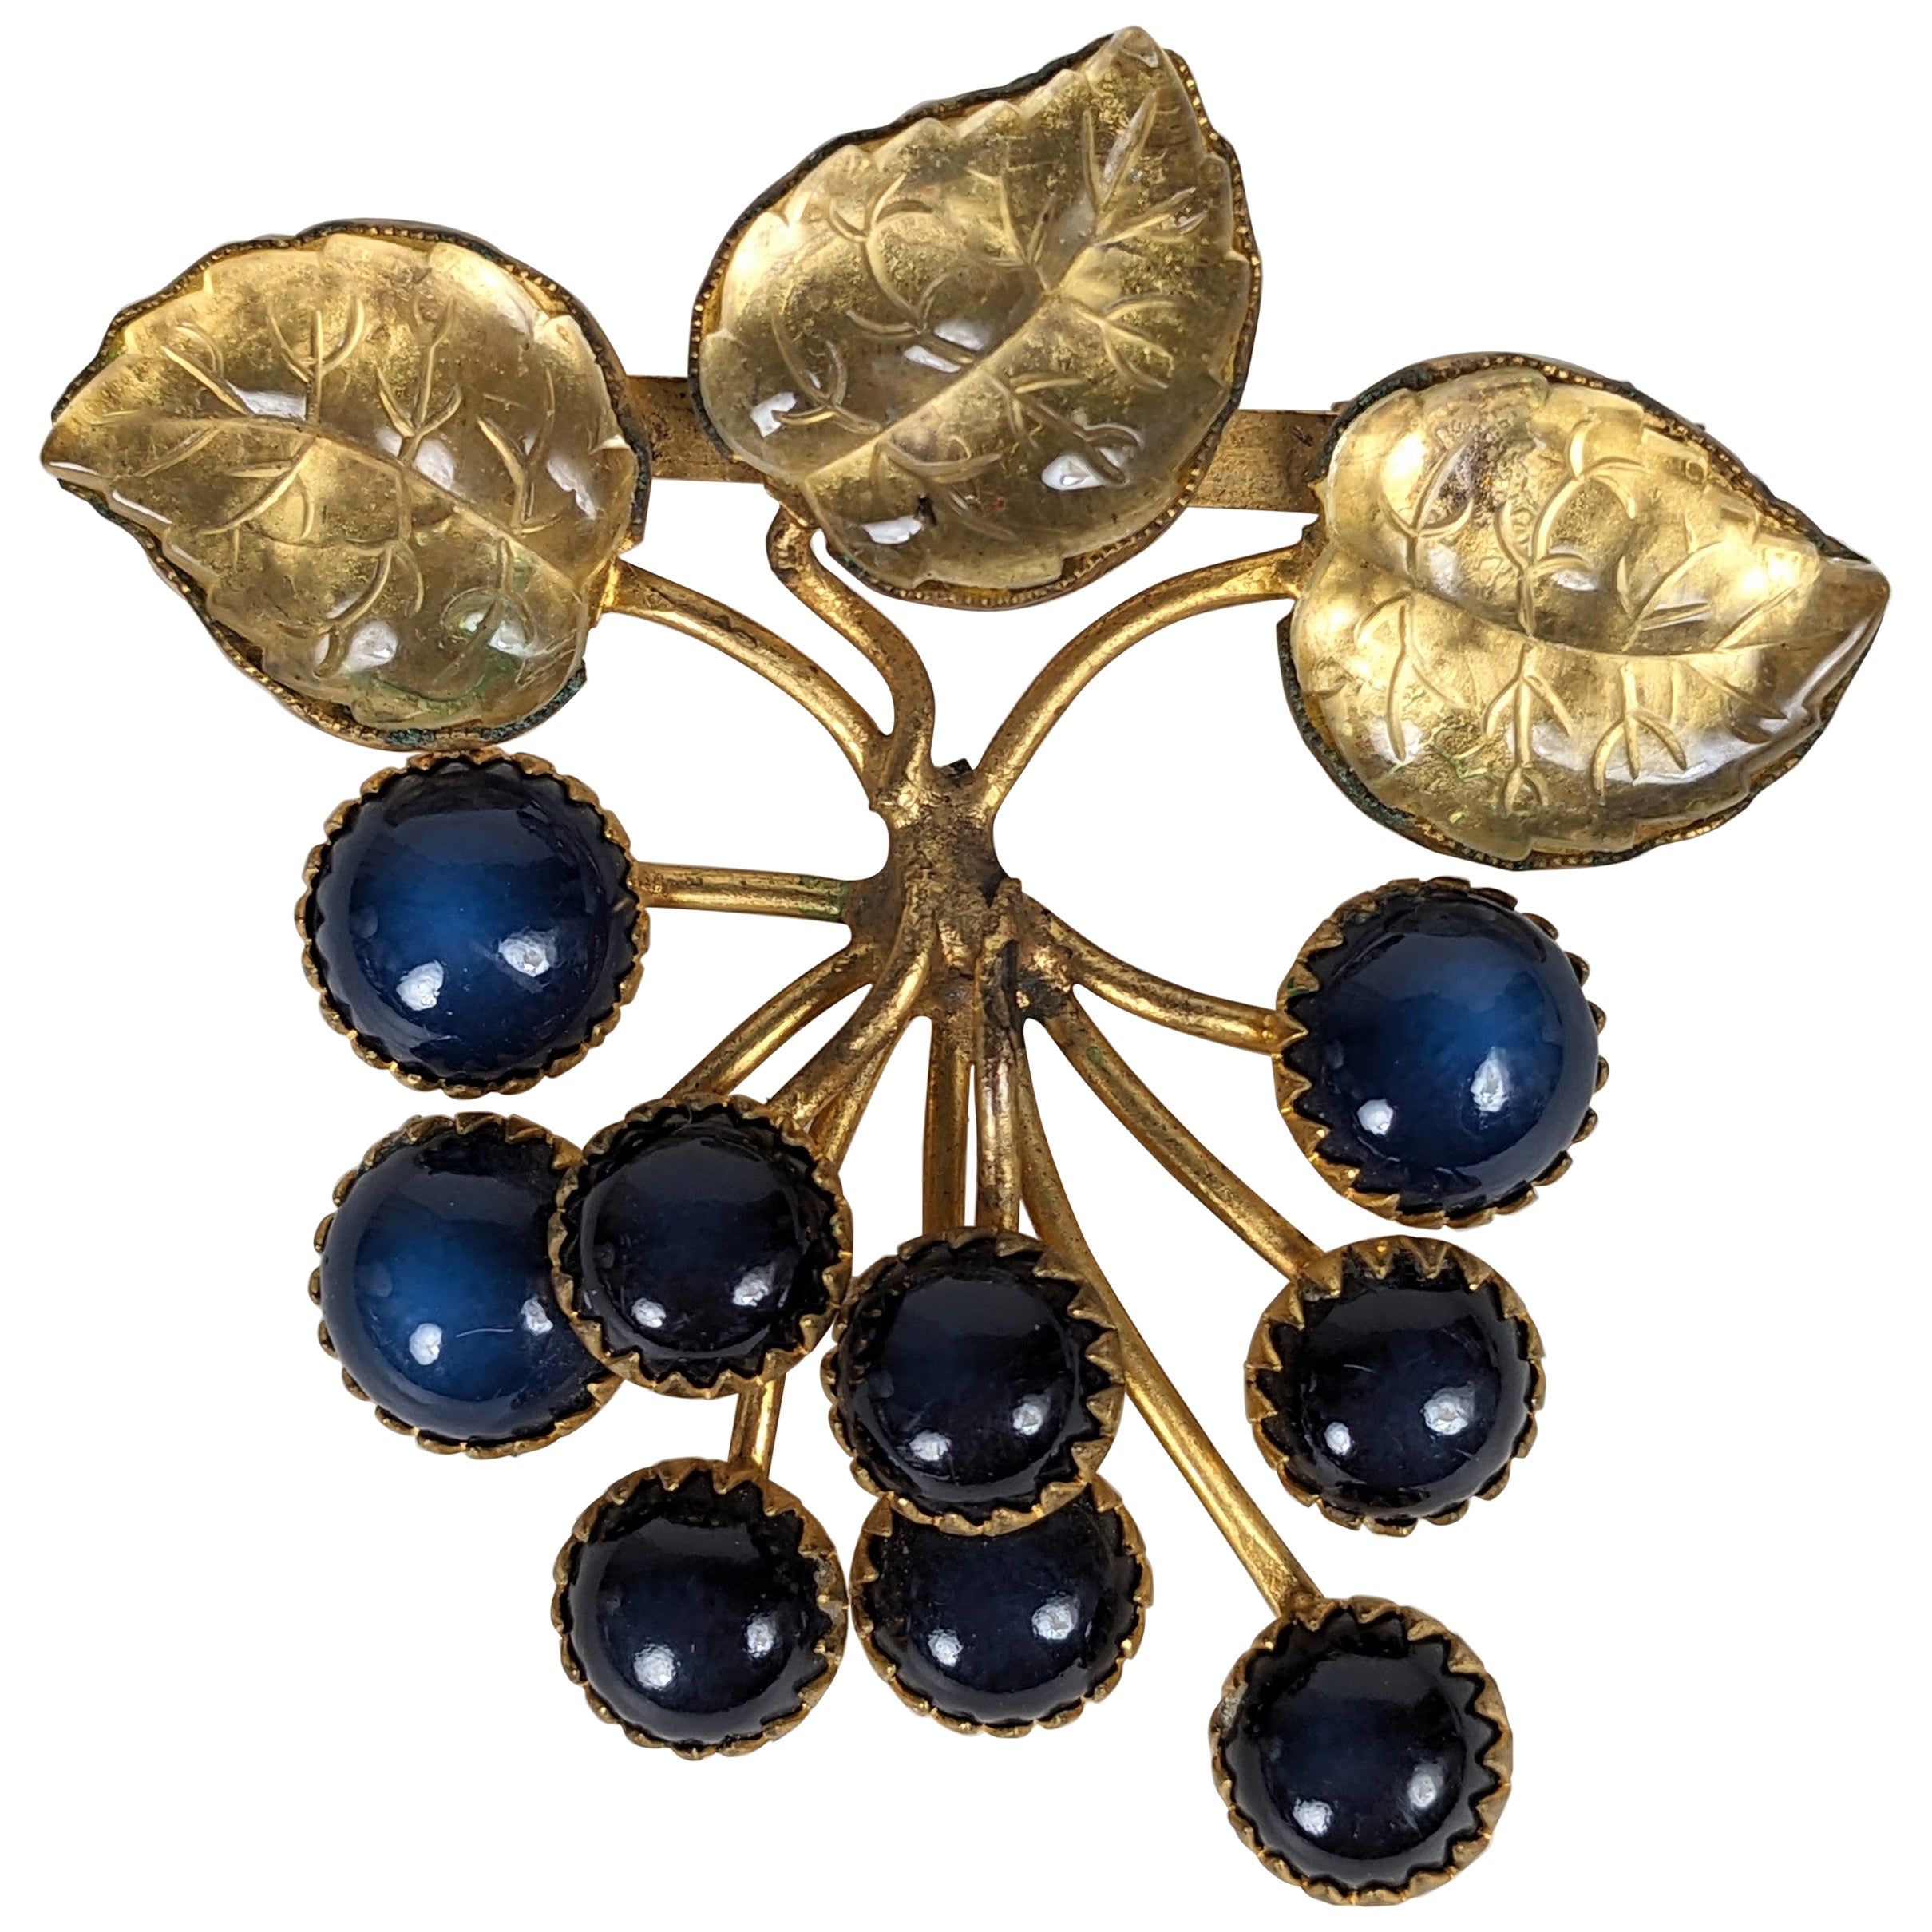  Countess Cis Berry Brooch For Sale